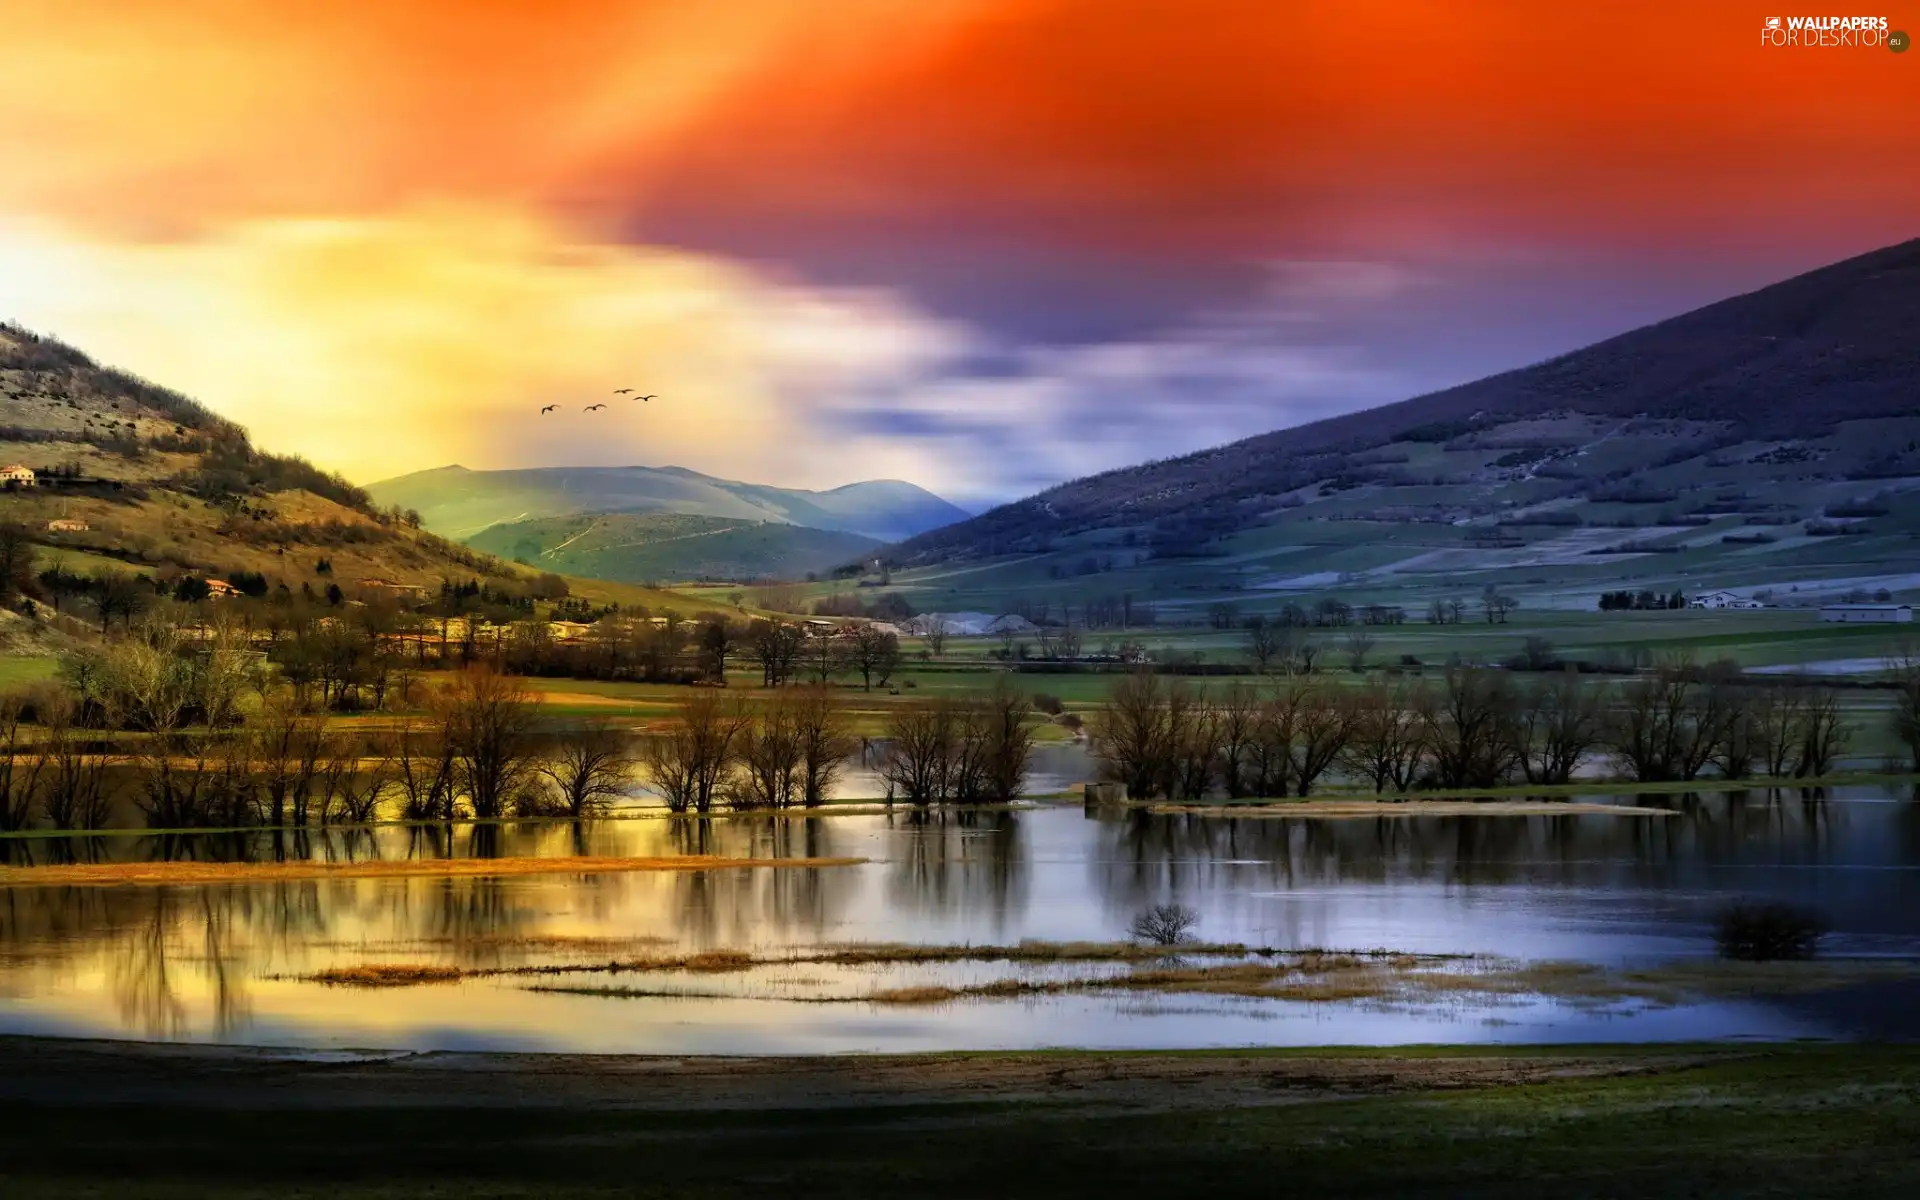 Houses, field, clouds, medows, River, Mountains, birds